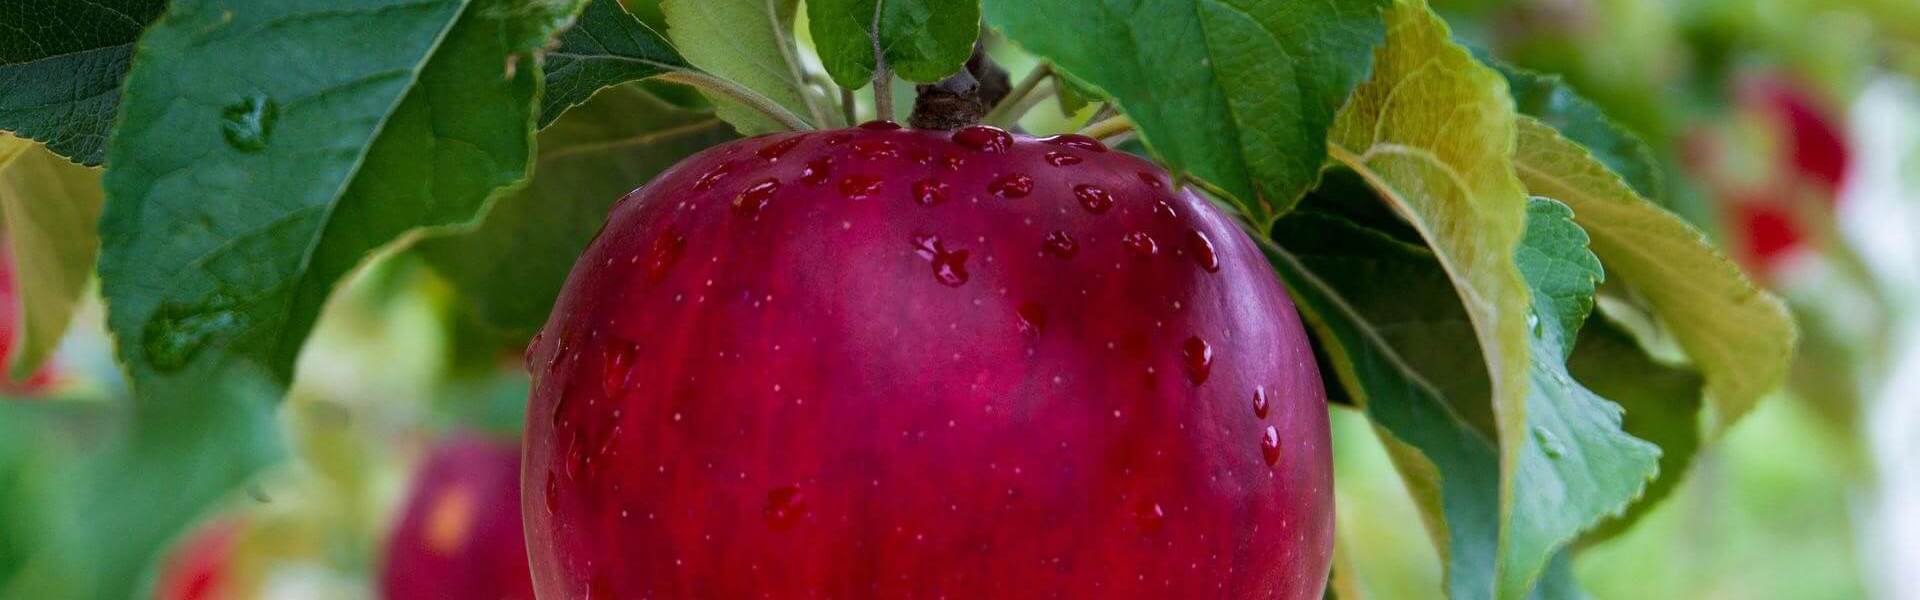 A close up of a red apple hanging from a tree